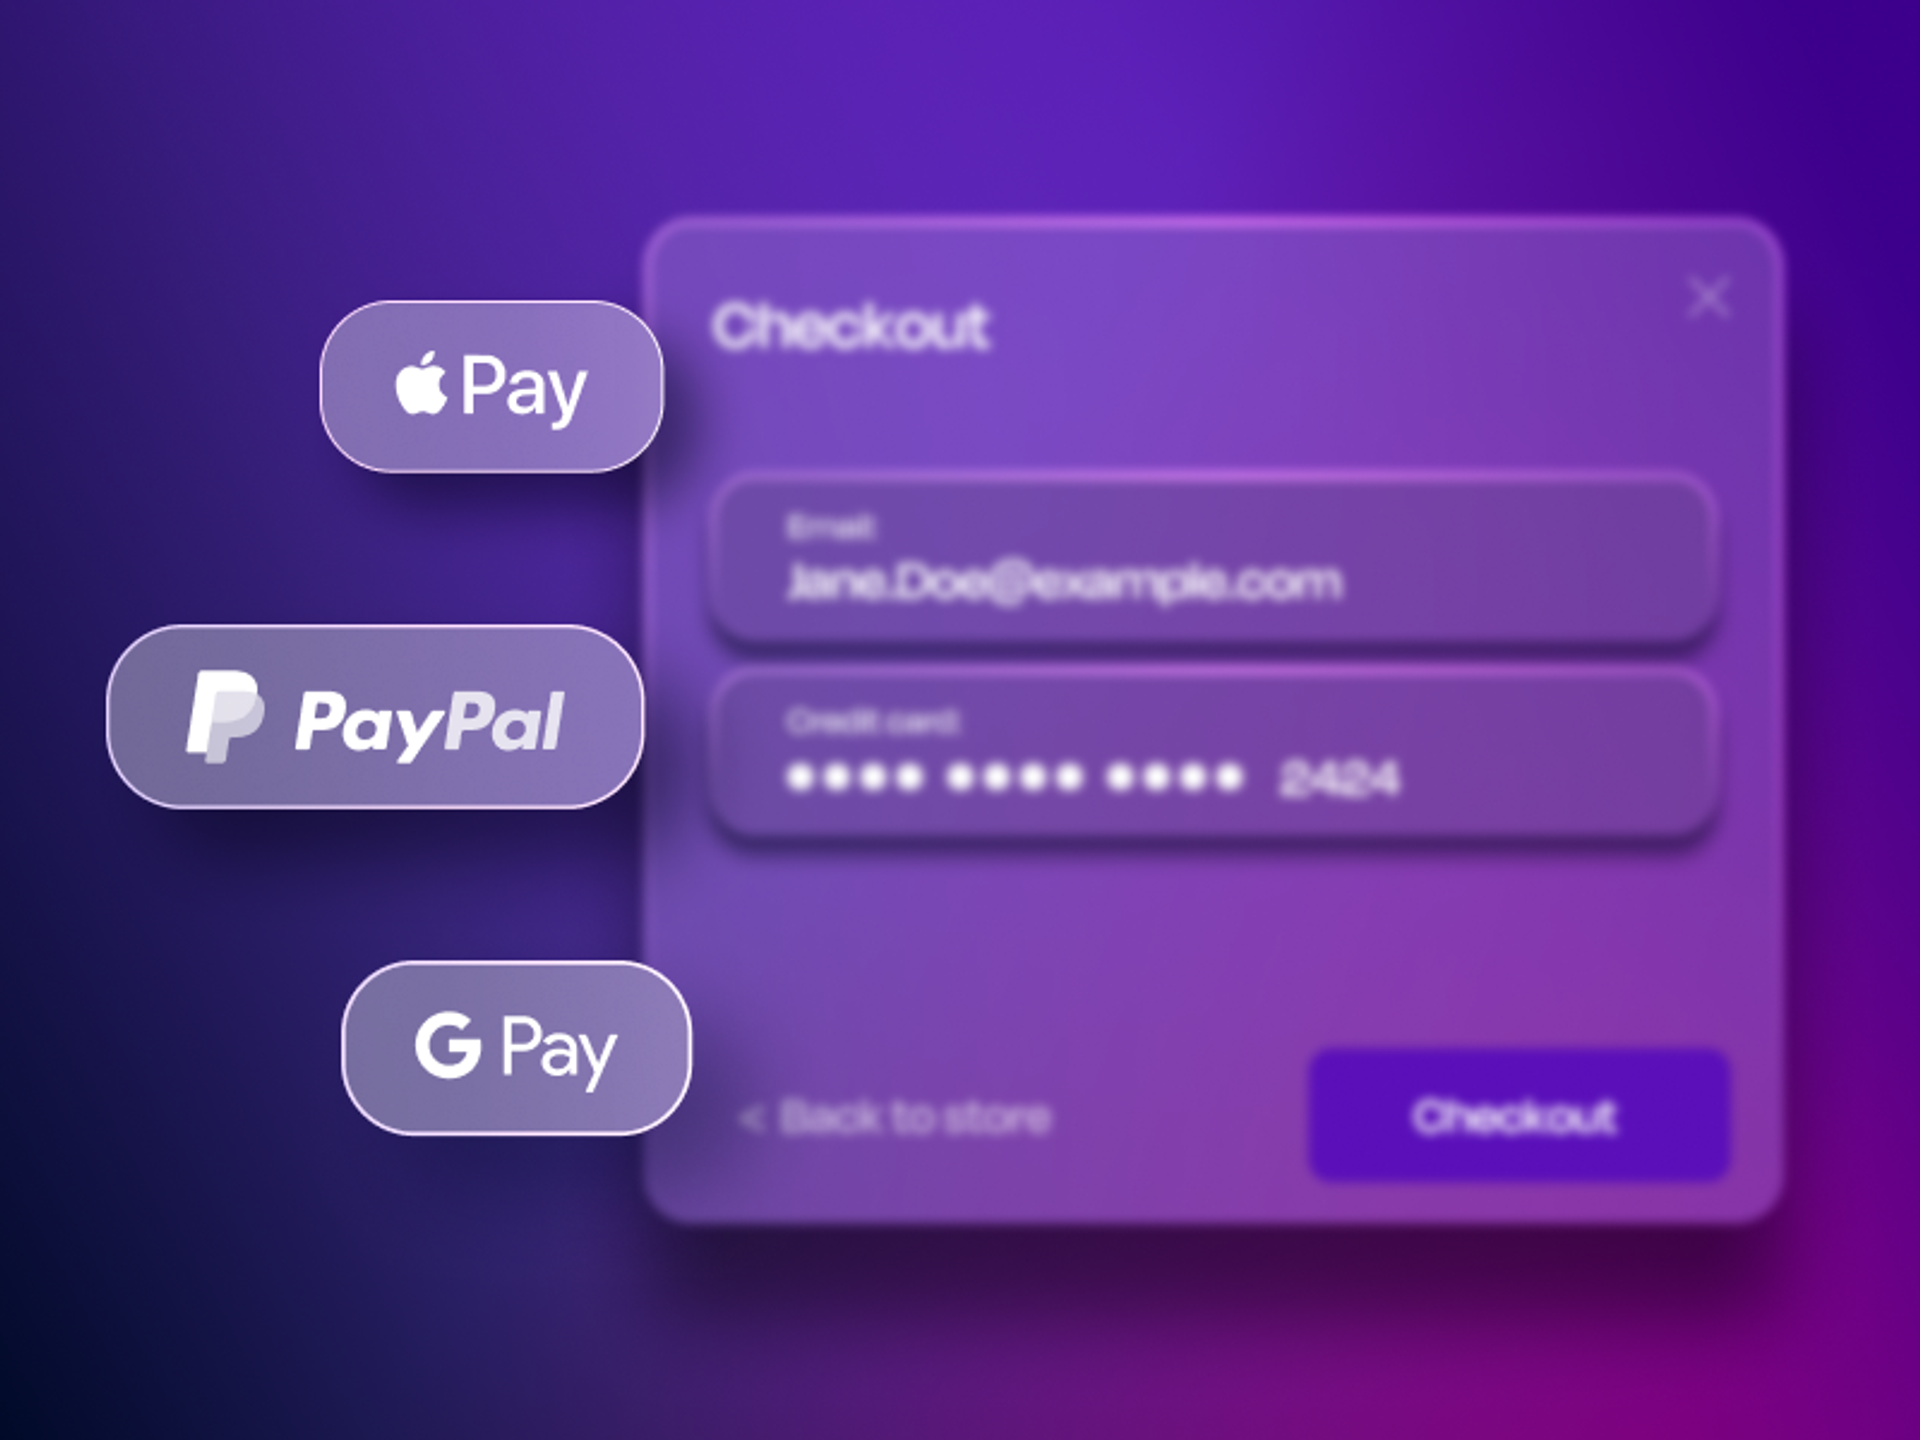 An illustration of a checkout interface with Apple pay, Paypal, and Google pay logos.